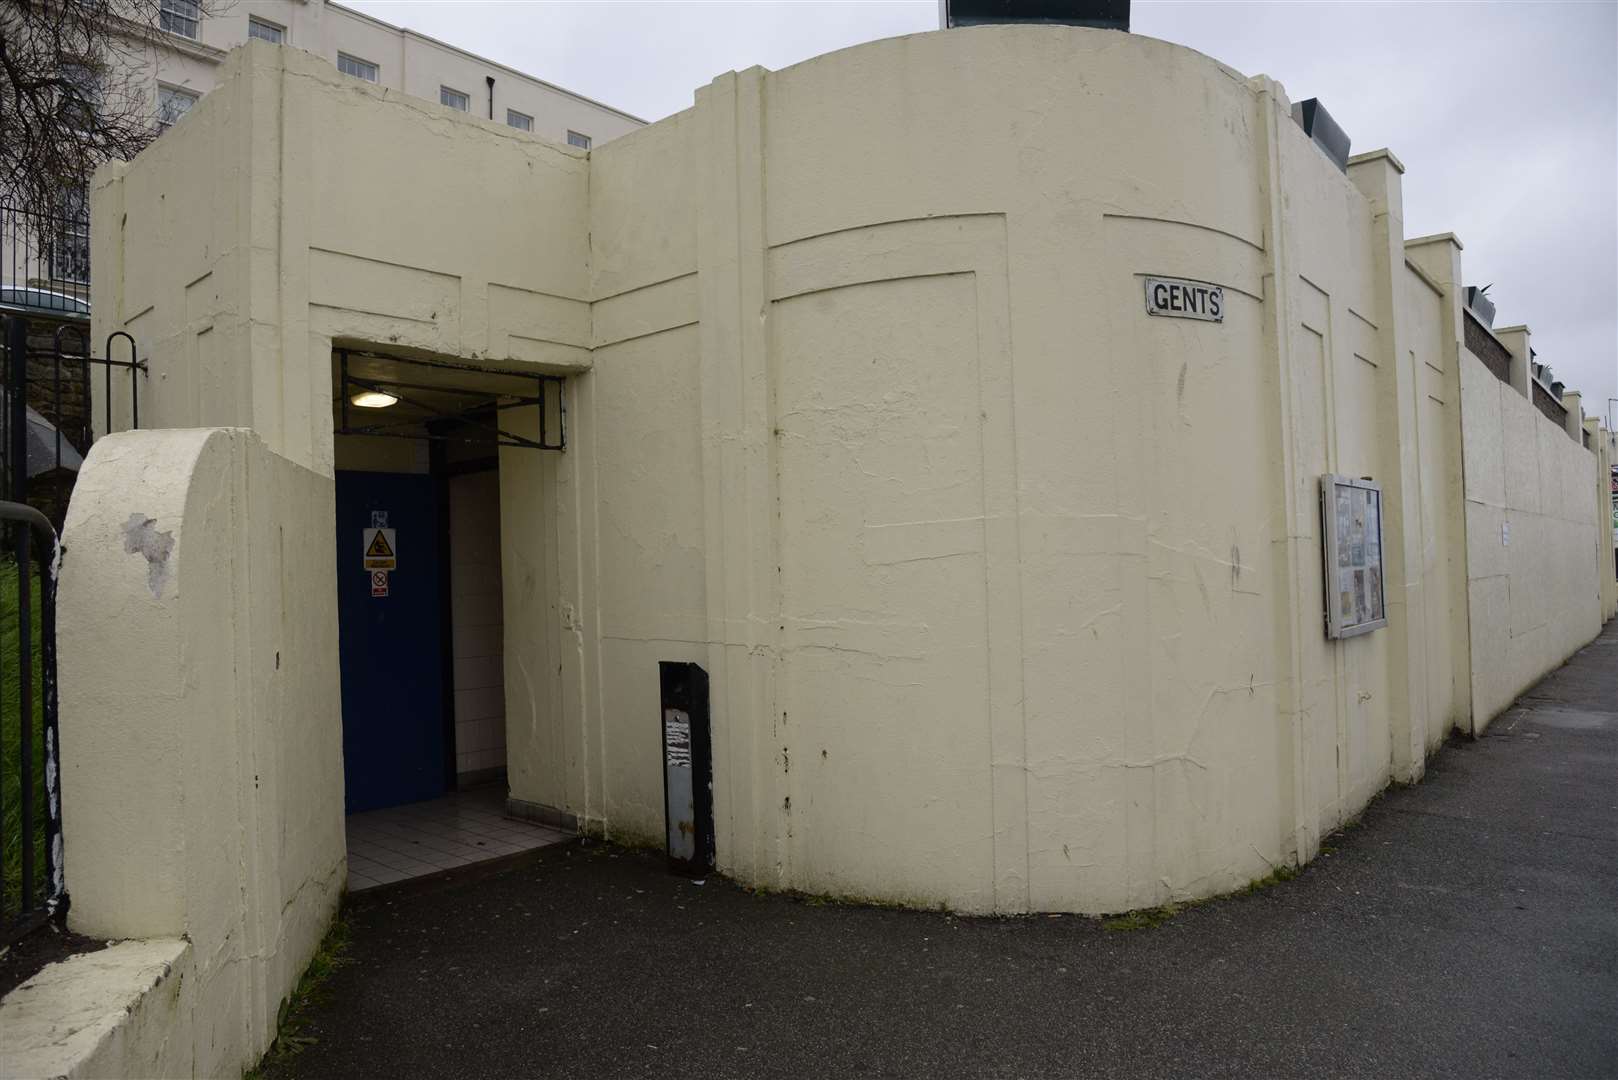 The St George's public toilets on Central Parade, Herne Bay